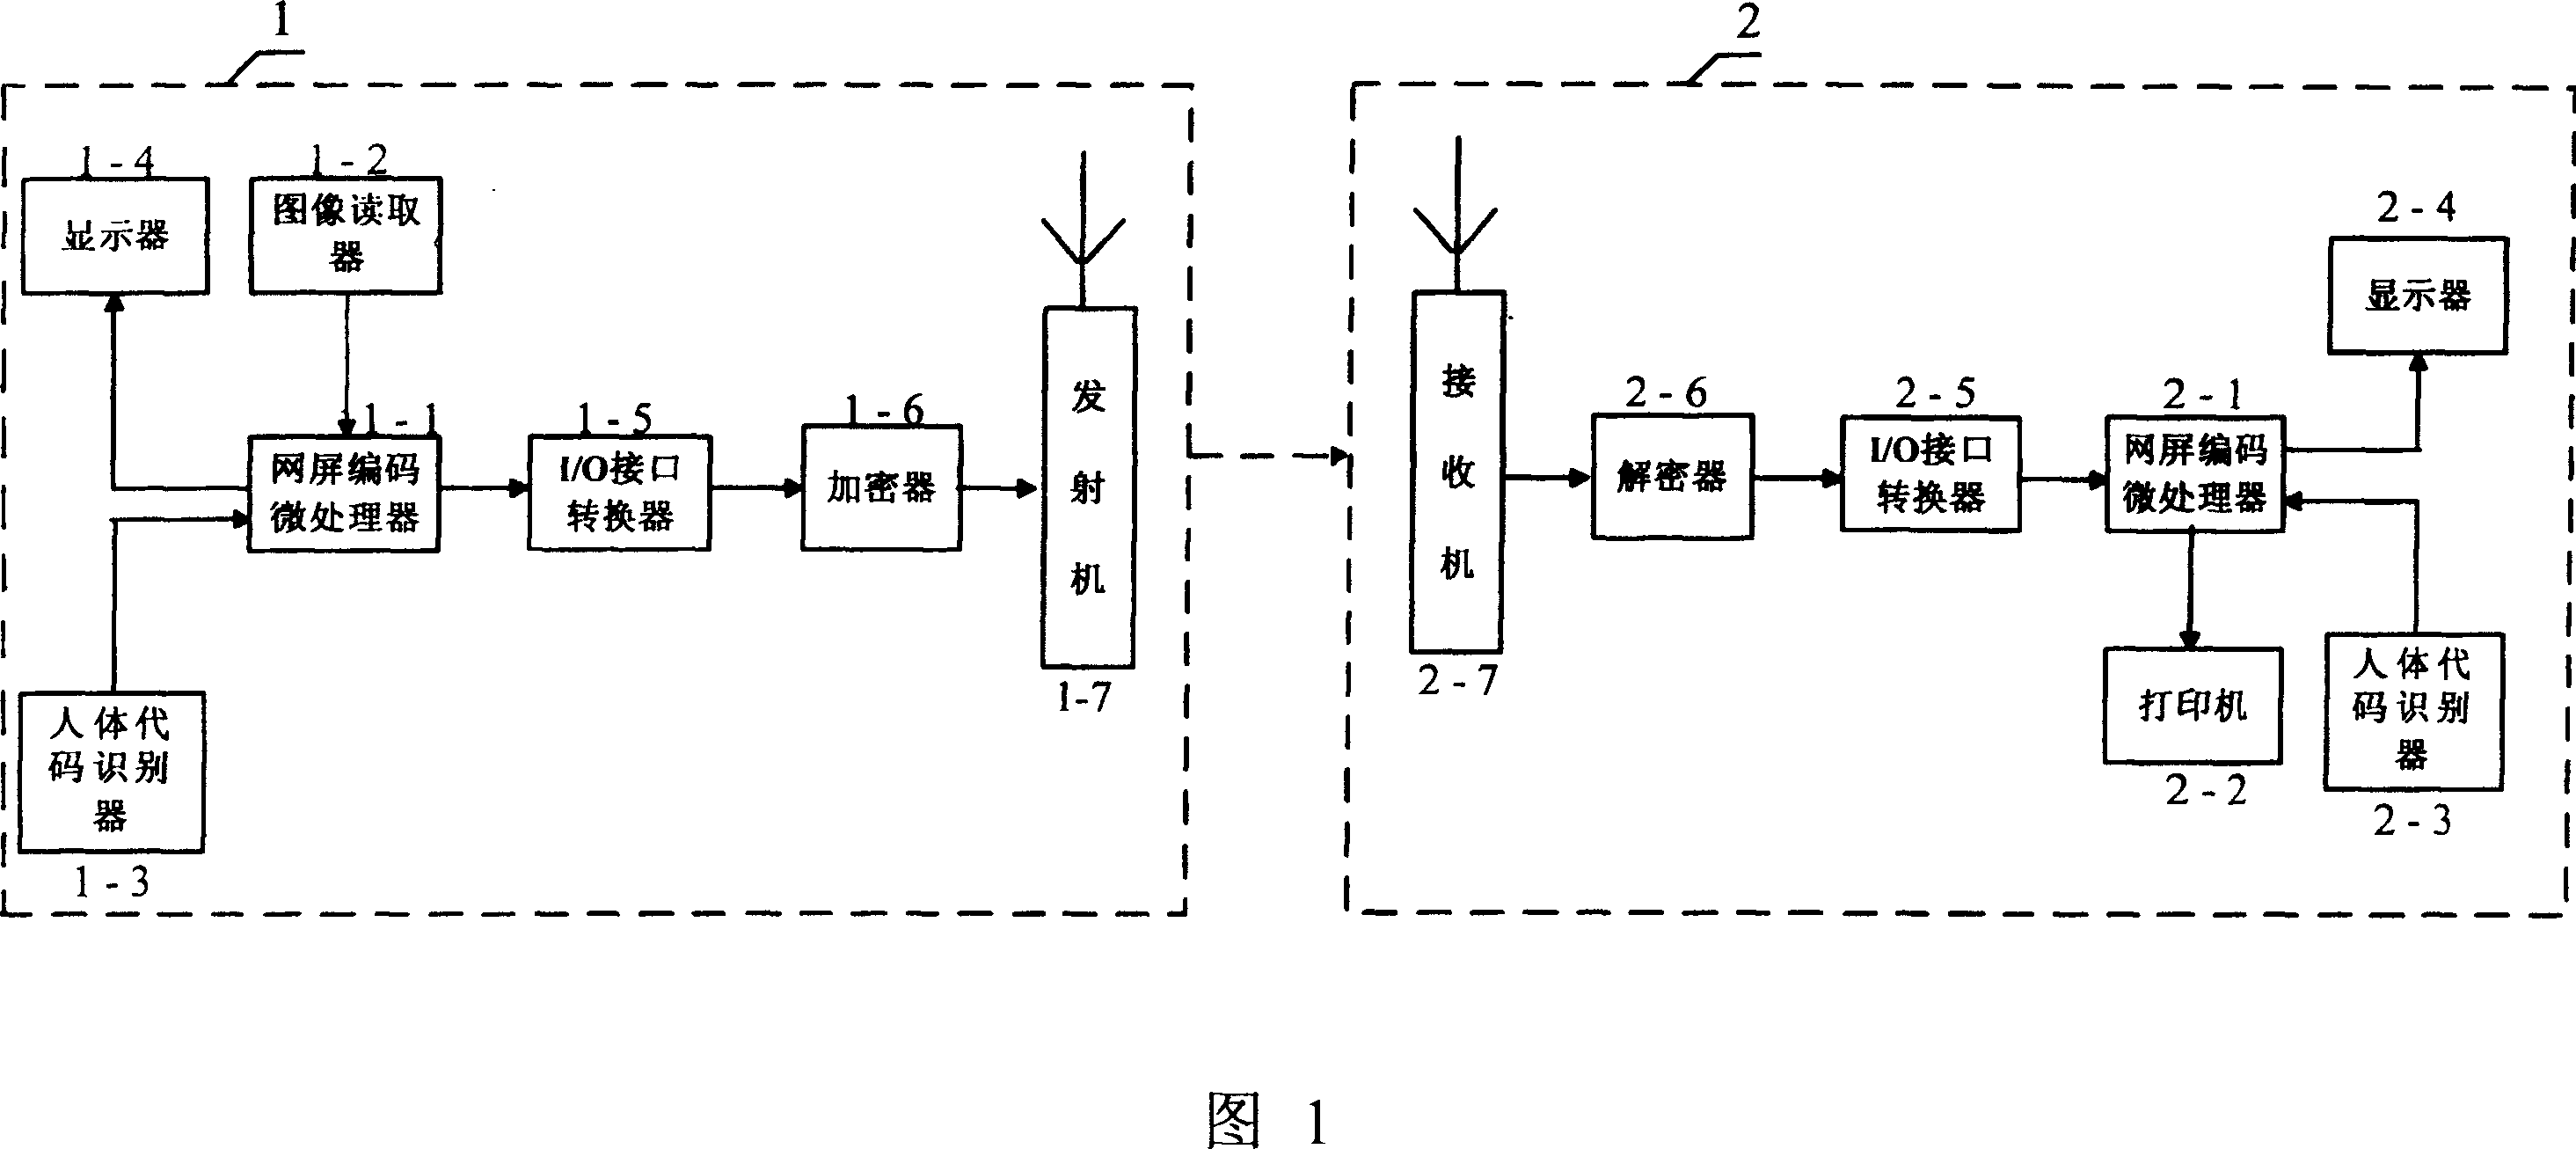 Screen coding embedded information communication device